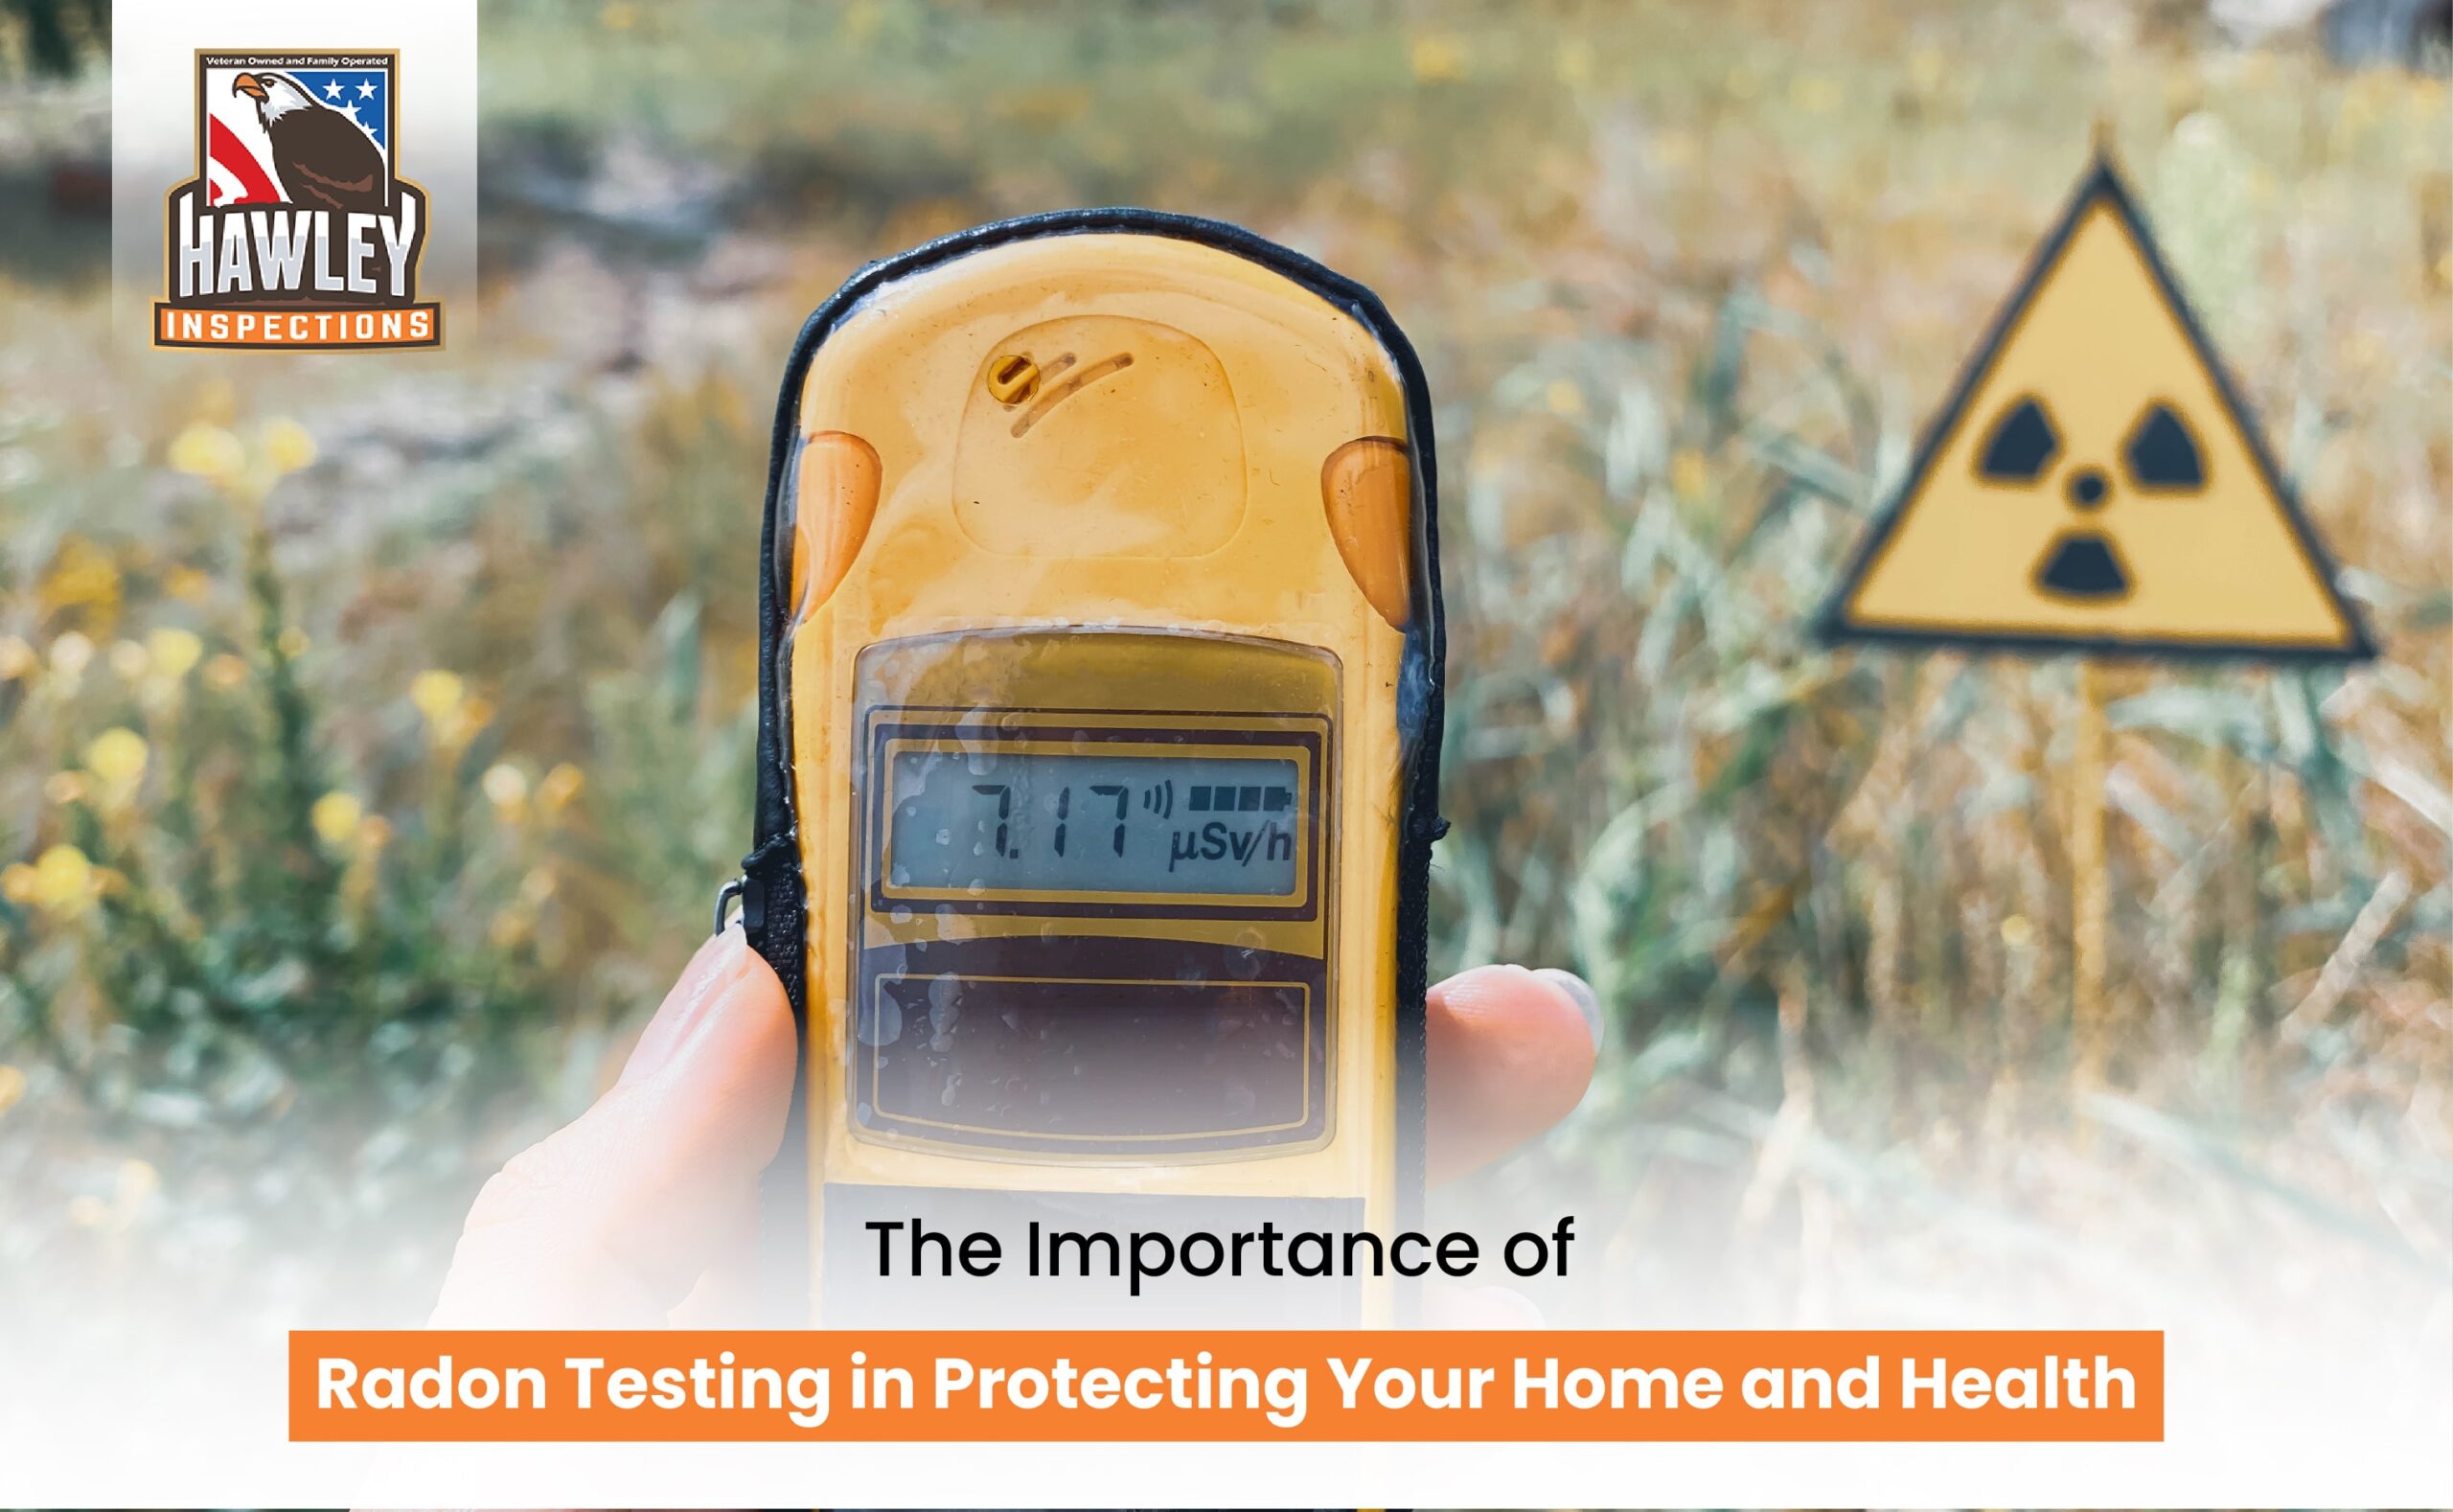 The Importance of Radon Testing in Protecting Your Home and Health